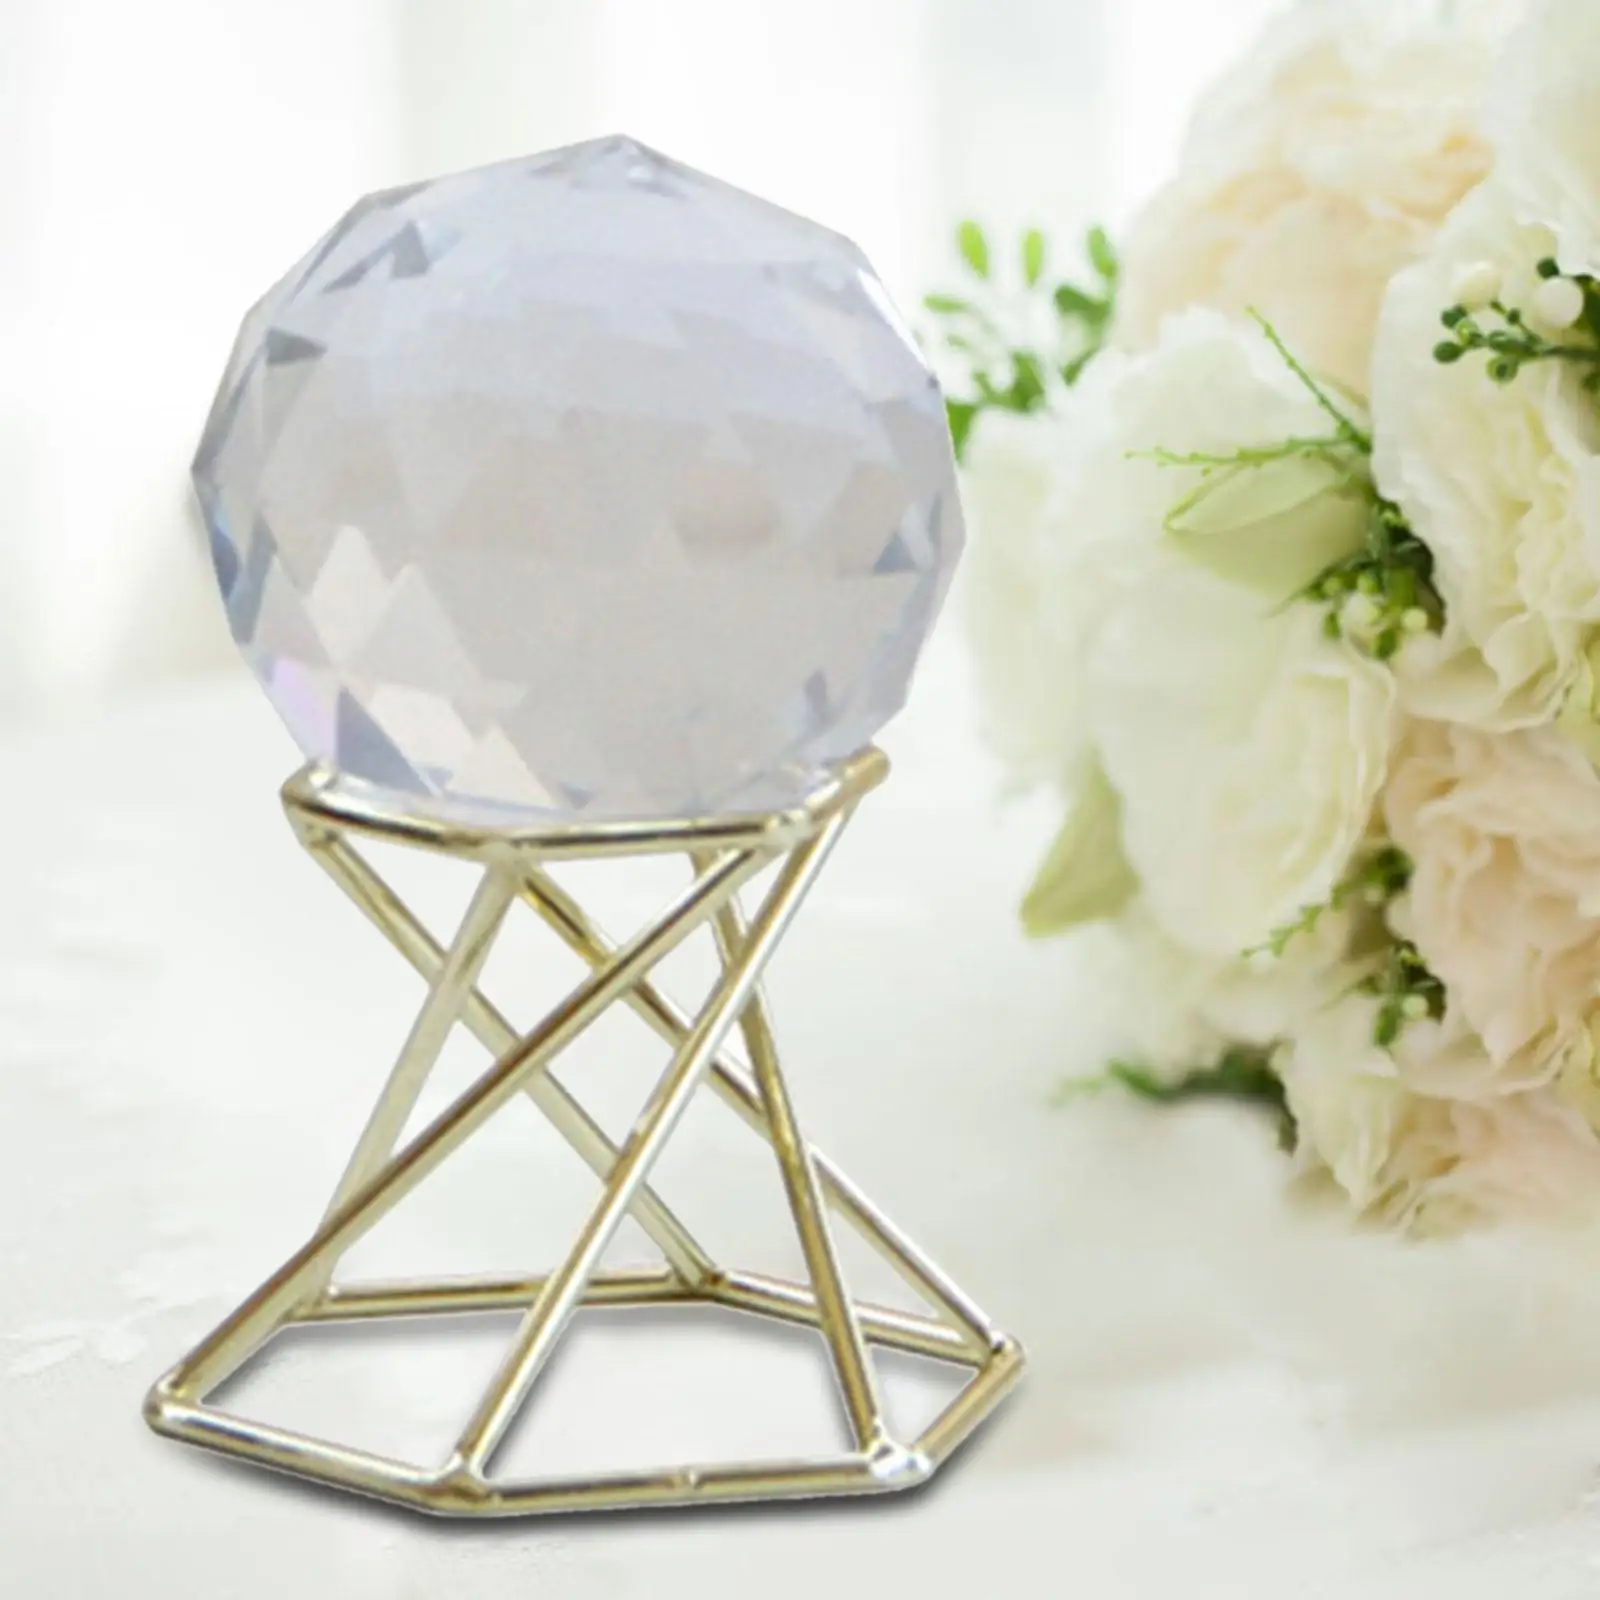 Creative Ball with Metal Stand Collectable Craft Ball Holder for Restaurant Table Bedroom Decor Gift